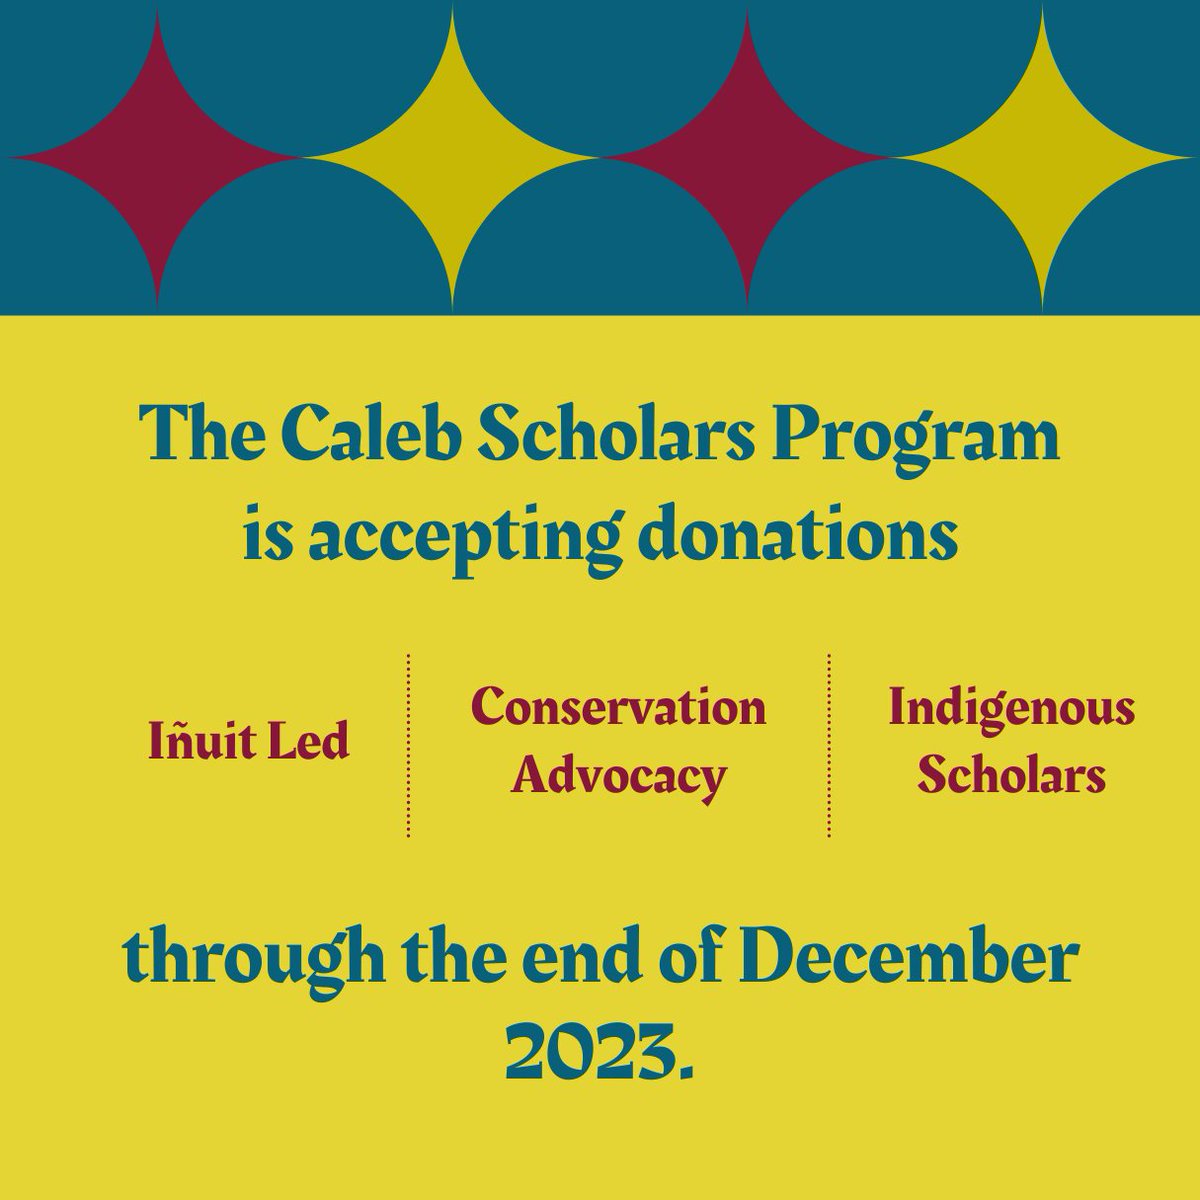 There is still time to donate to the Caleb Scholars Program. Every amount of support makes a difference in our scholars' success. Quyanaqpak for your time and consideration!